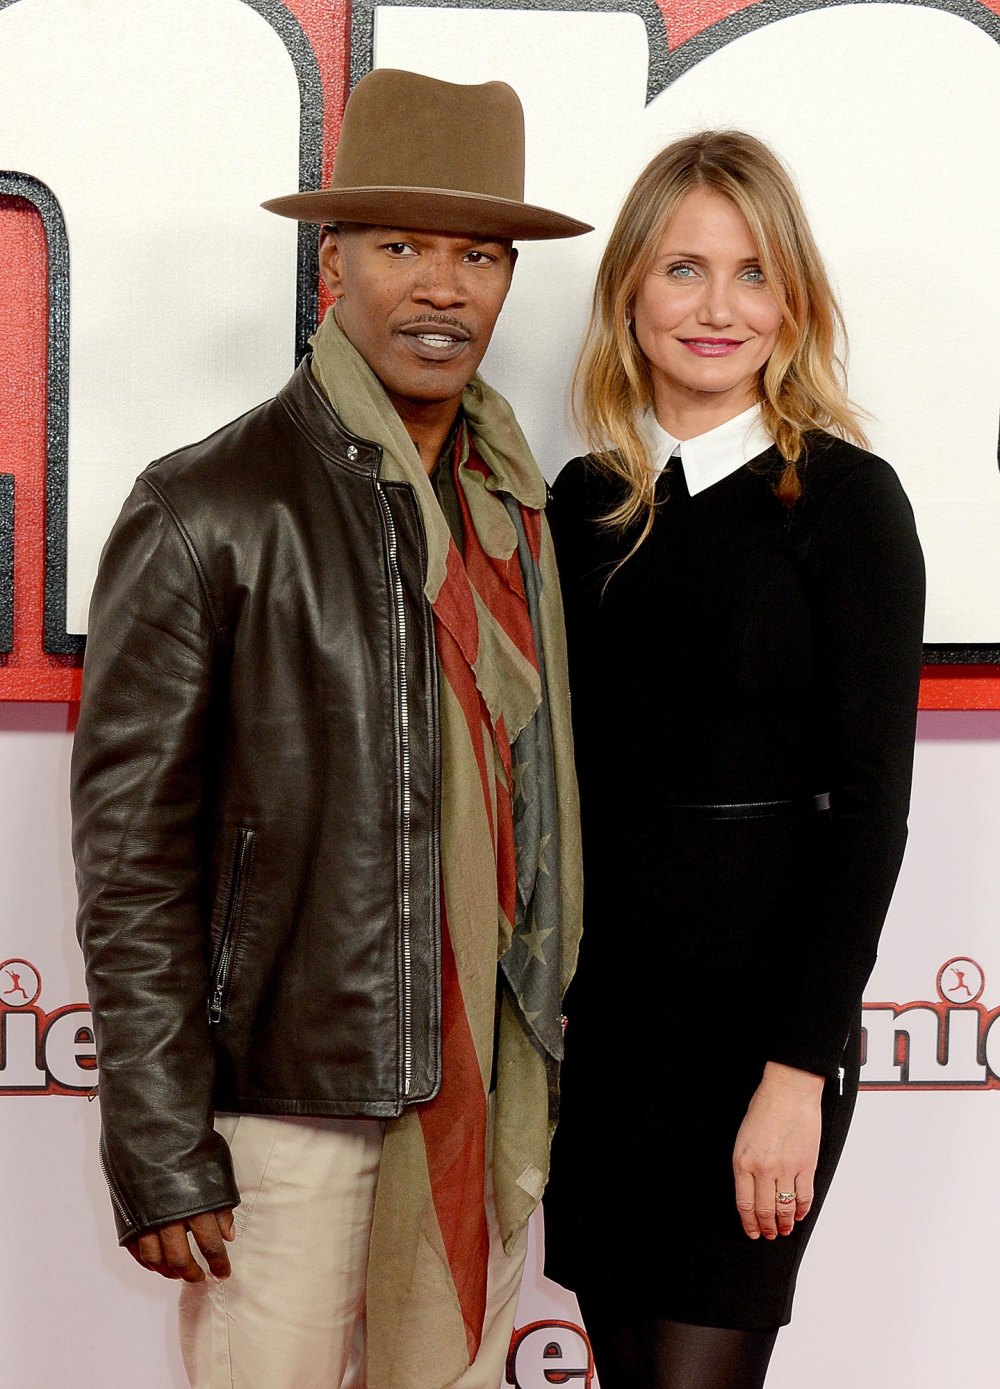 Cameron Diaz Is Angry Over Crazy Rumors About Her and Jamie Foxx Having On Set Feud 322